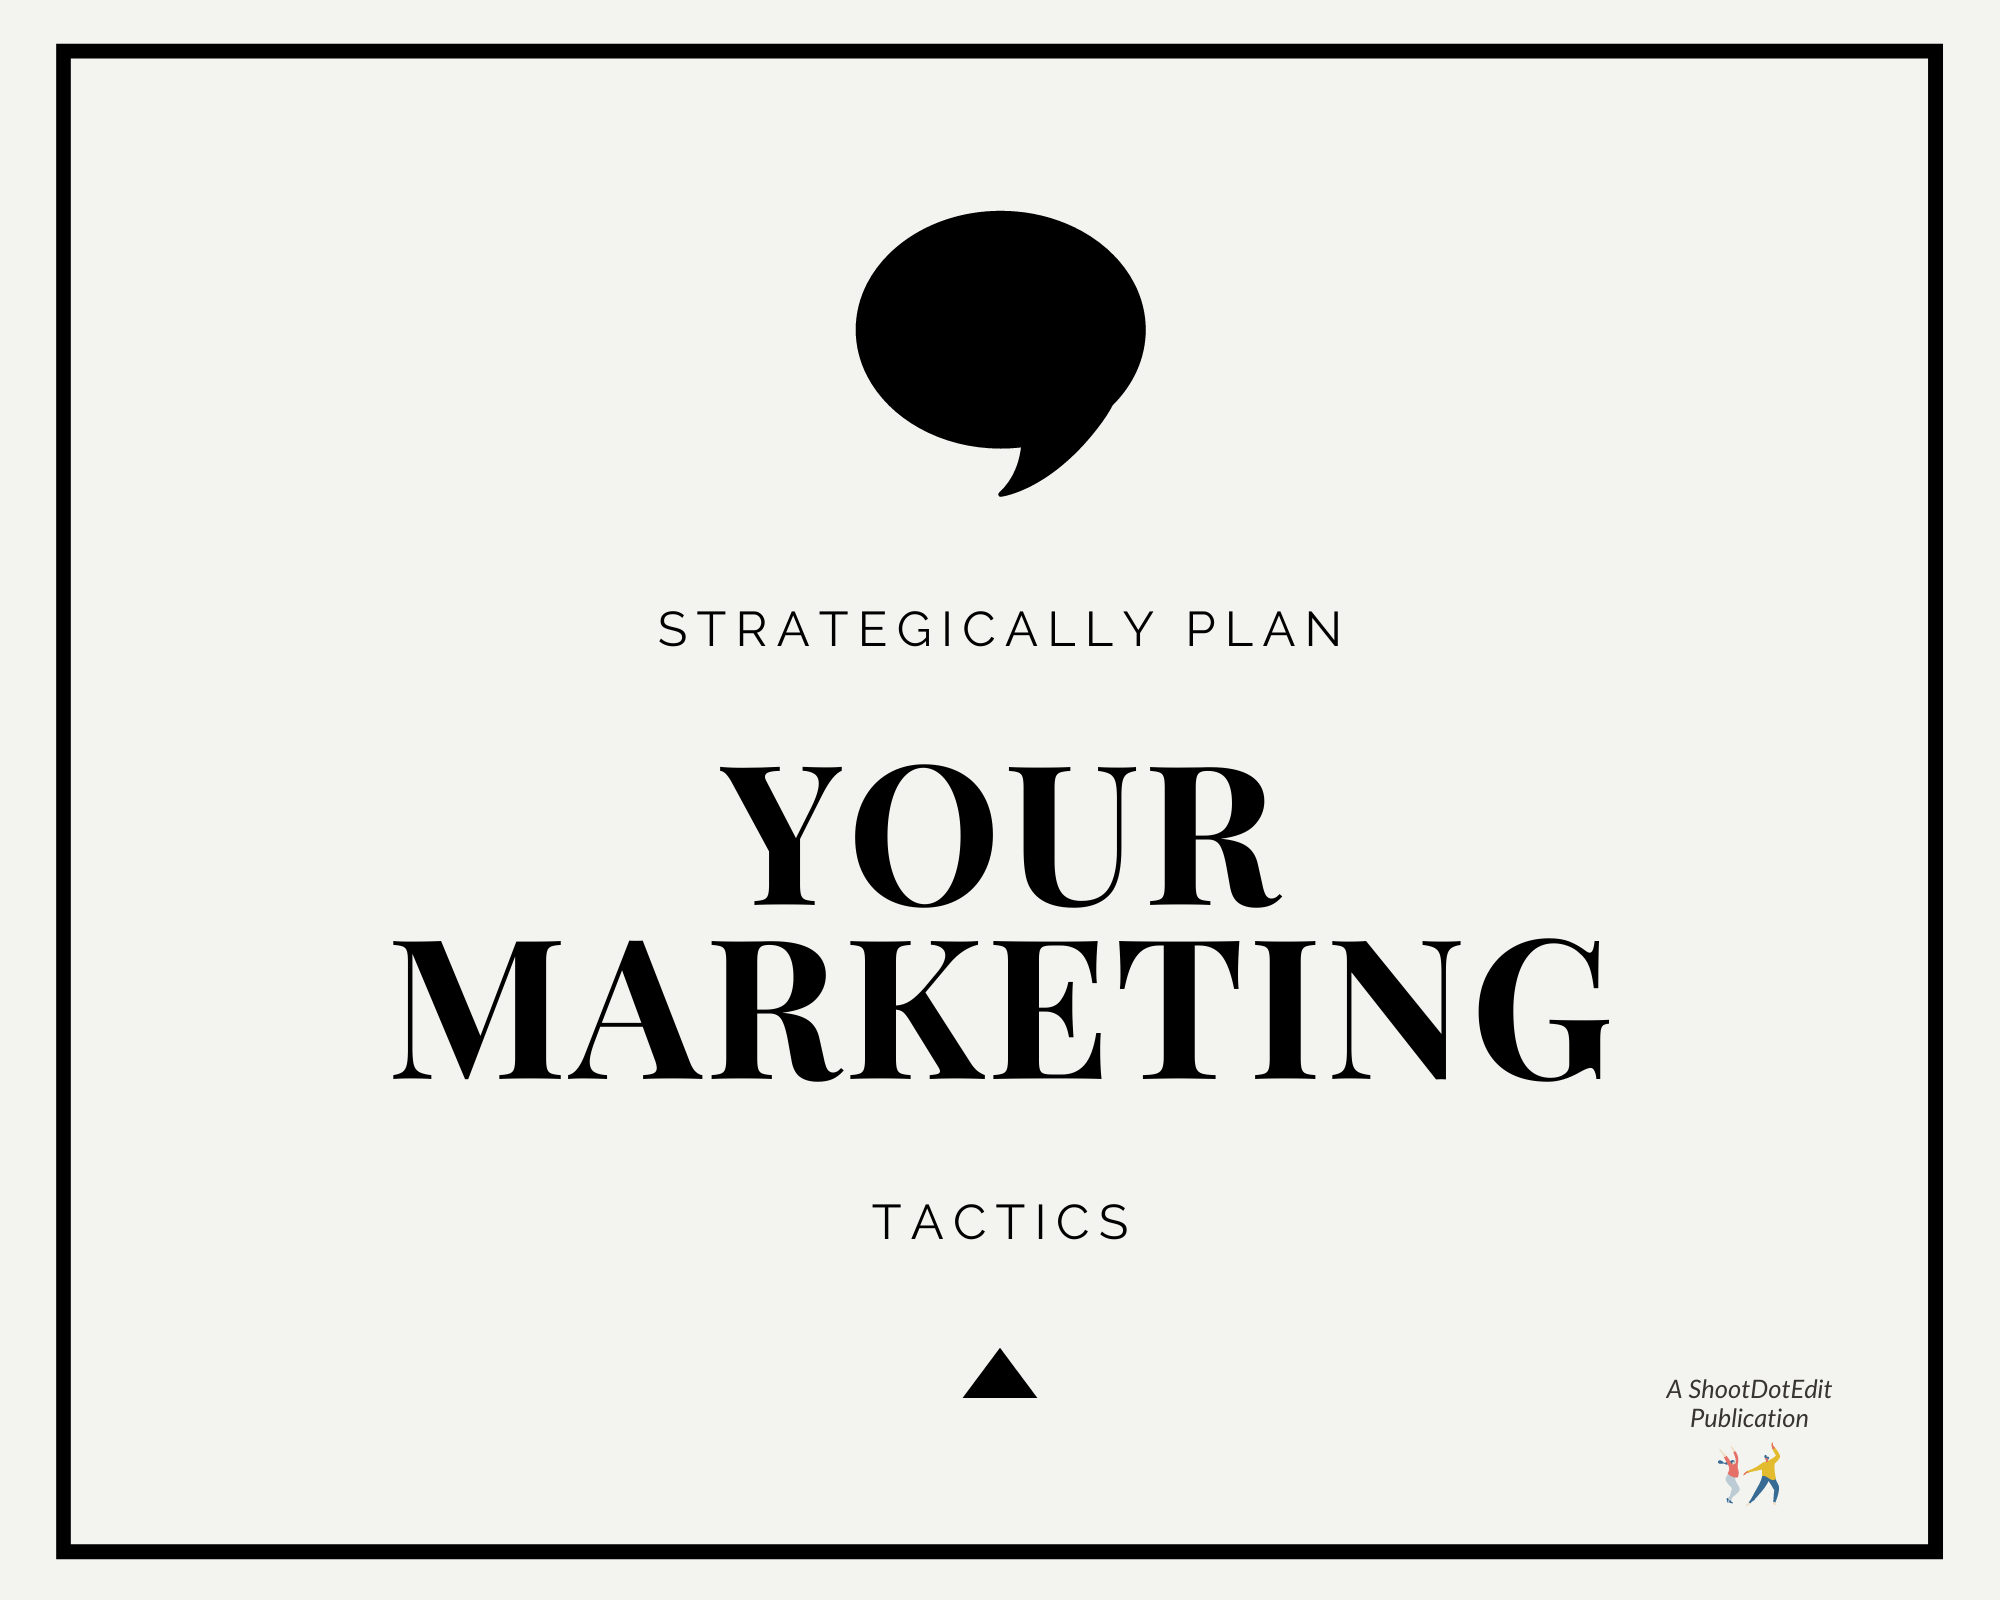 Infographic stating strategically plan your marketing tactics